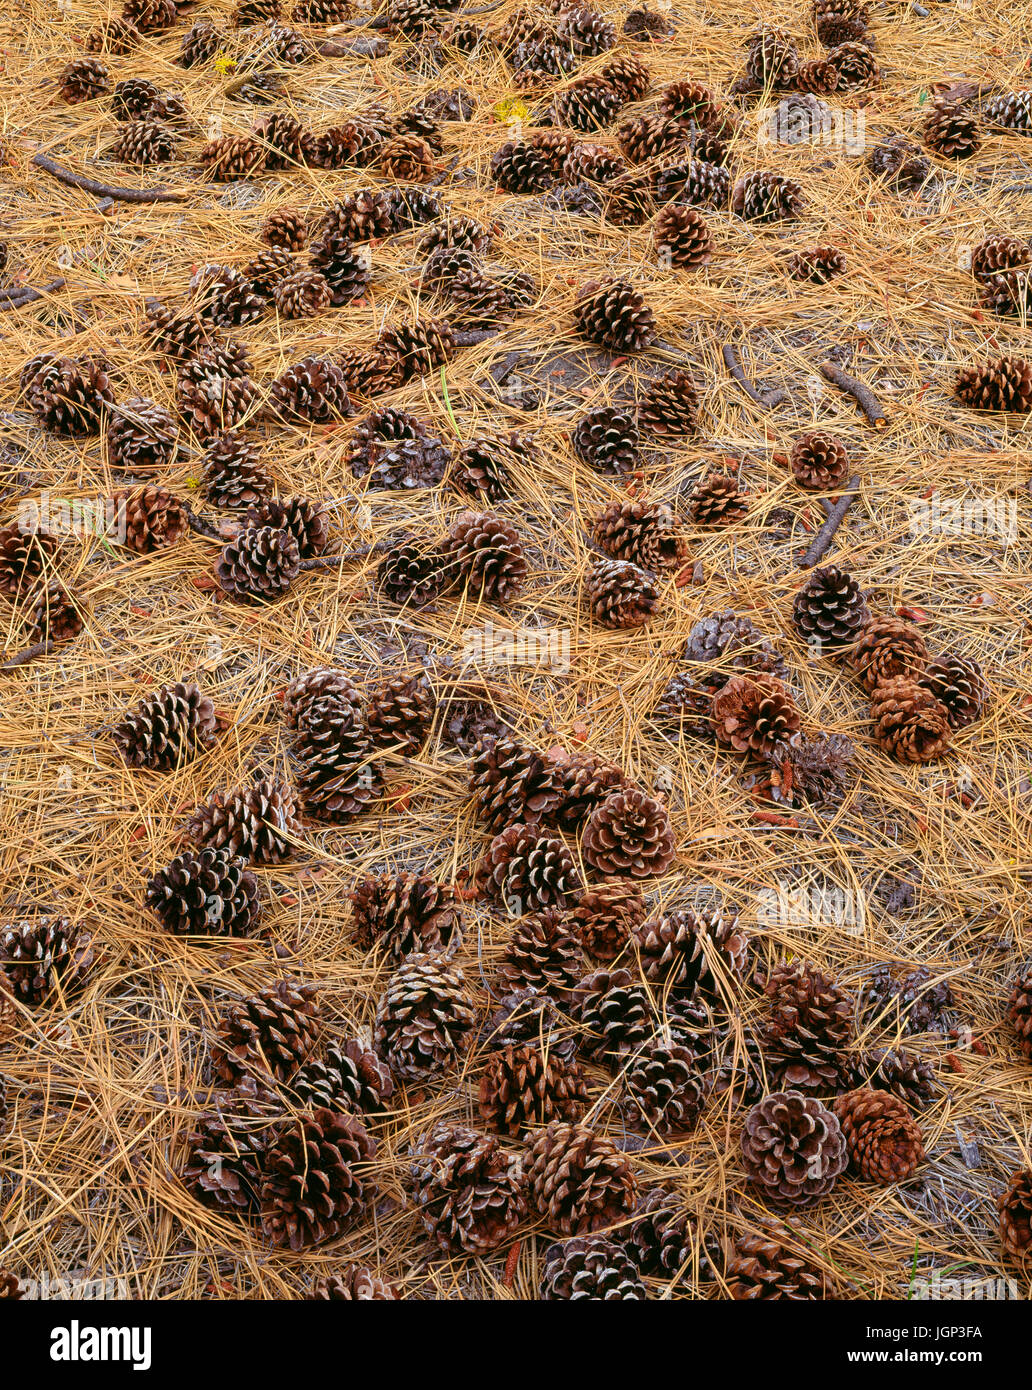 USA, Oregon, Newberry National Volcanic Monument, Cones, and needles of ponderosa pine cover the forest floor. Stock Photo